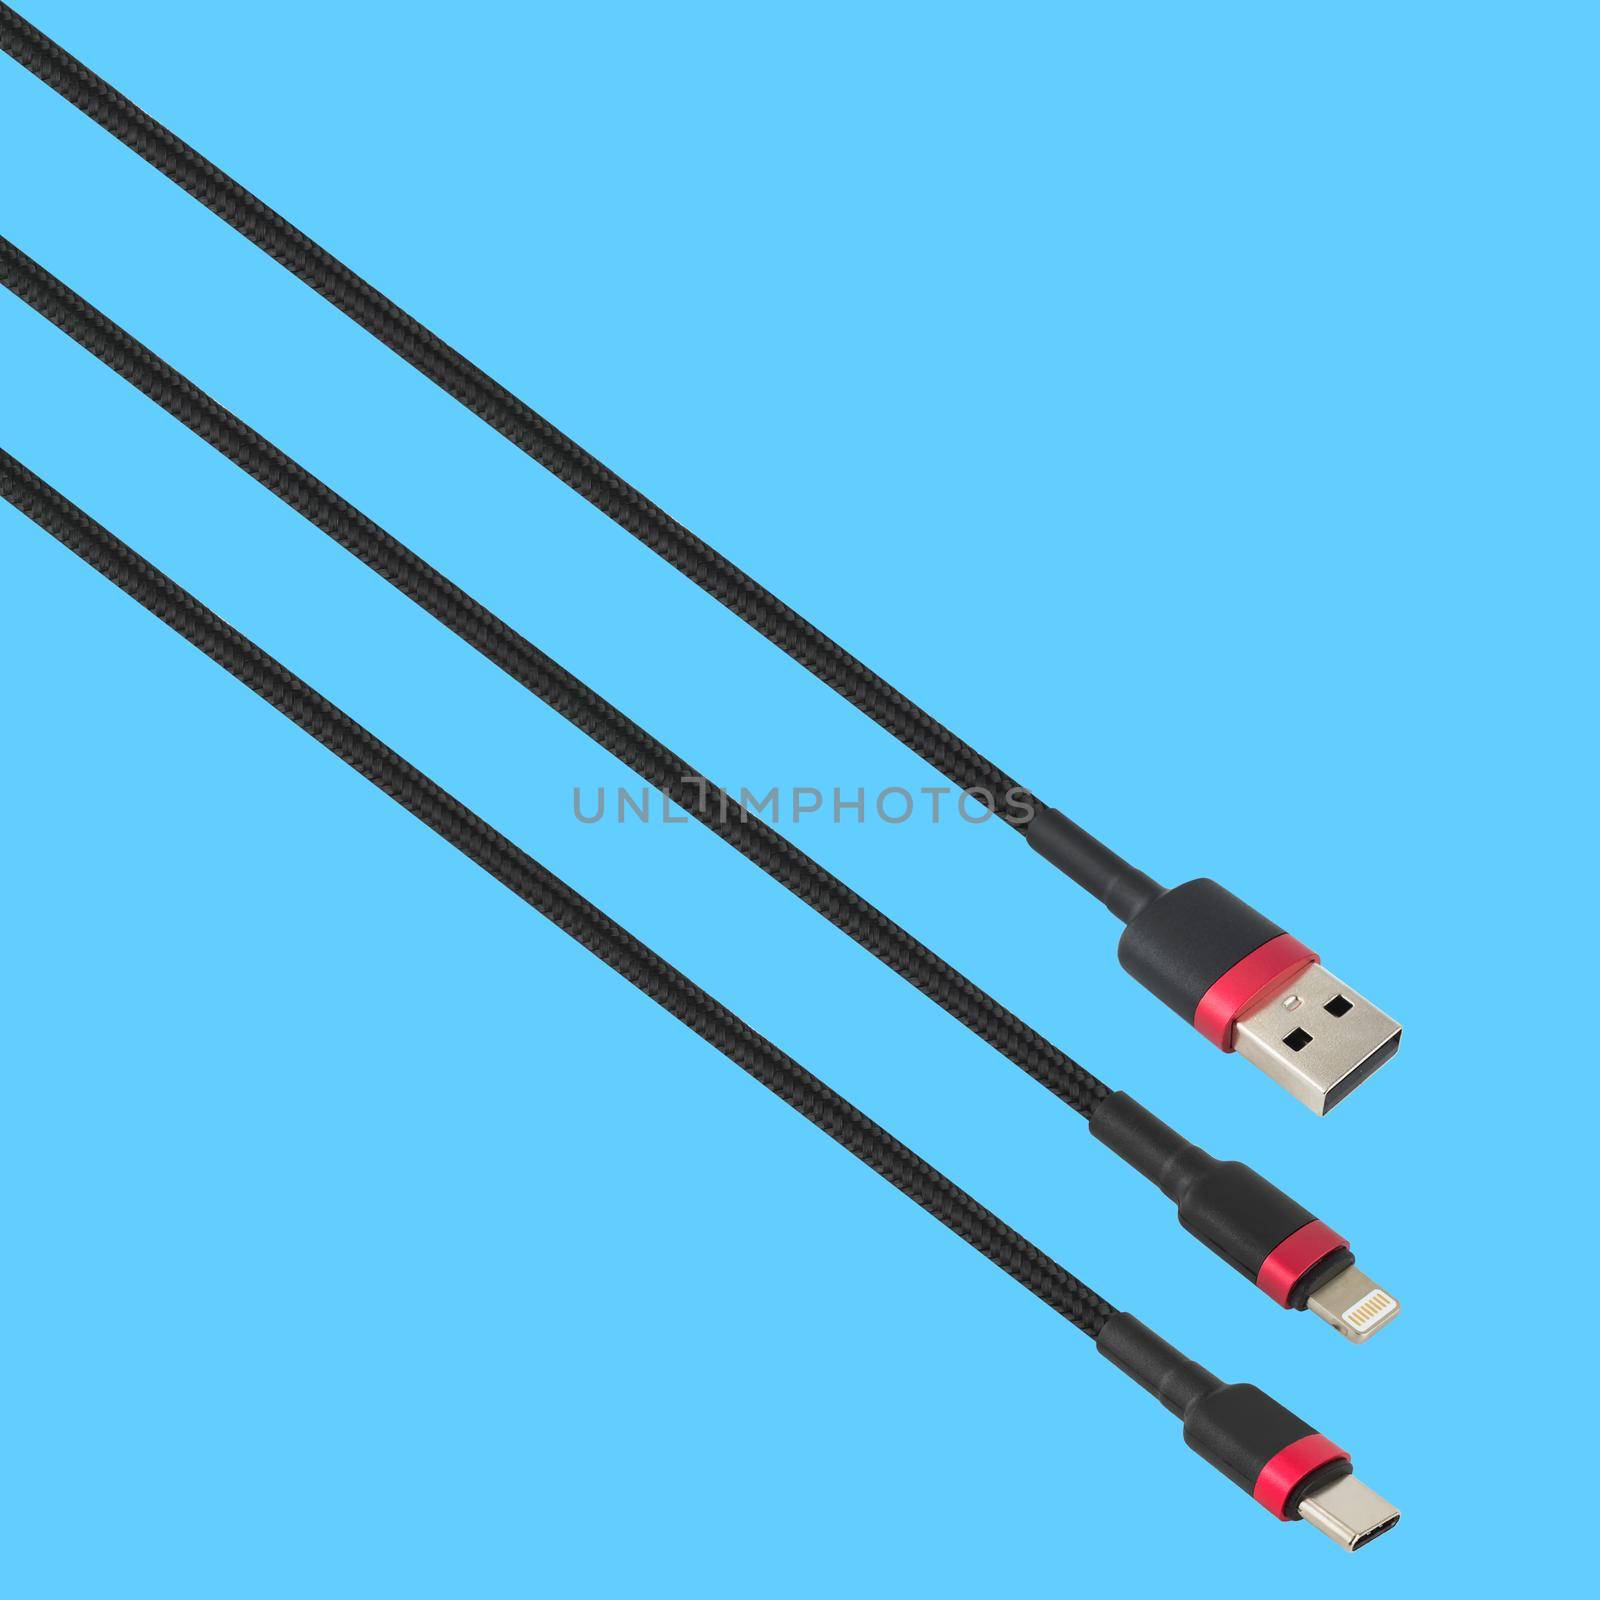 Cable with USB, Type-C and Lightning connector, isolated on a blue background